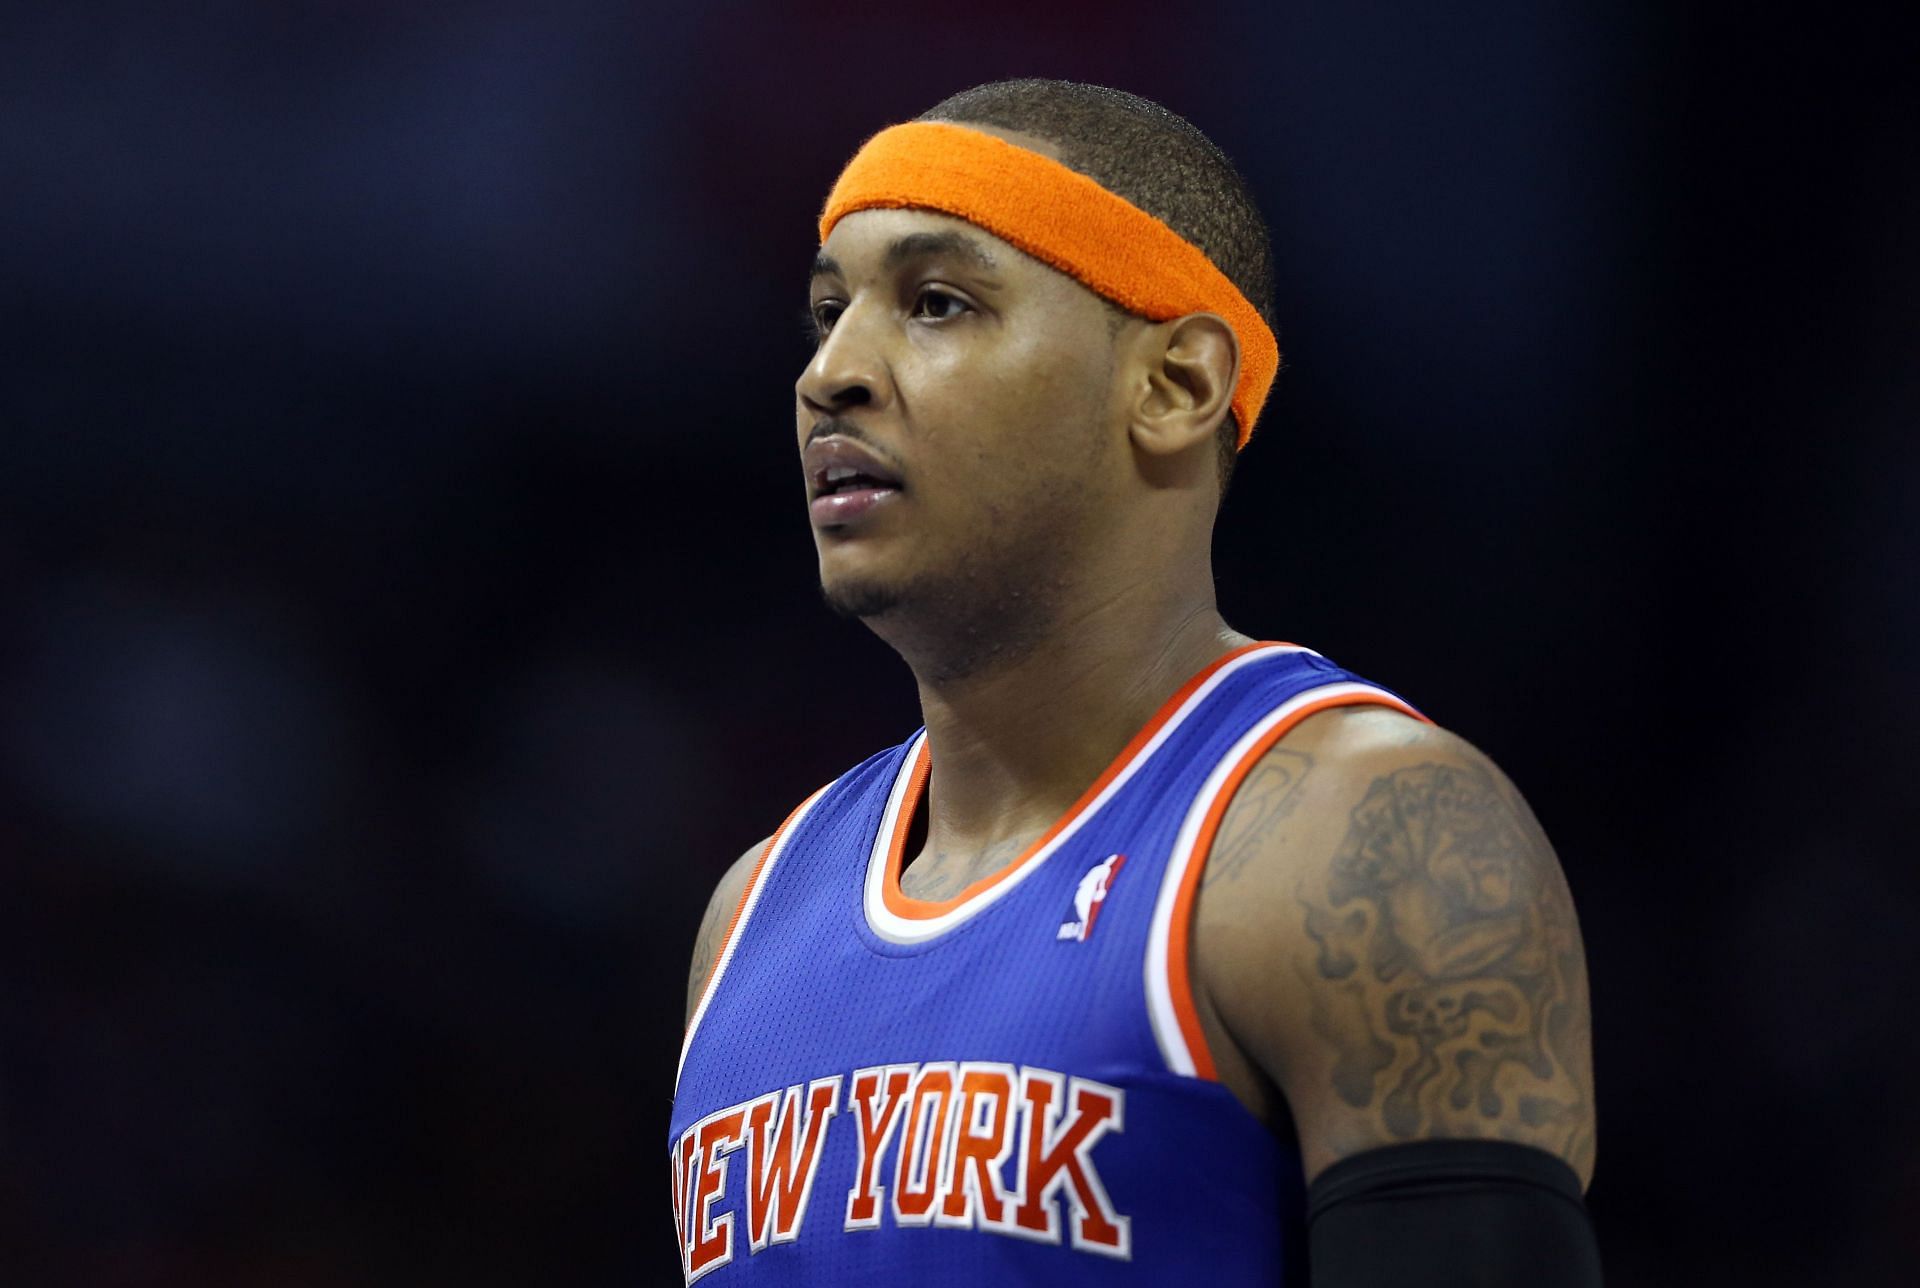 Carmelo Anthony with New York Knicks in 2012